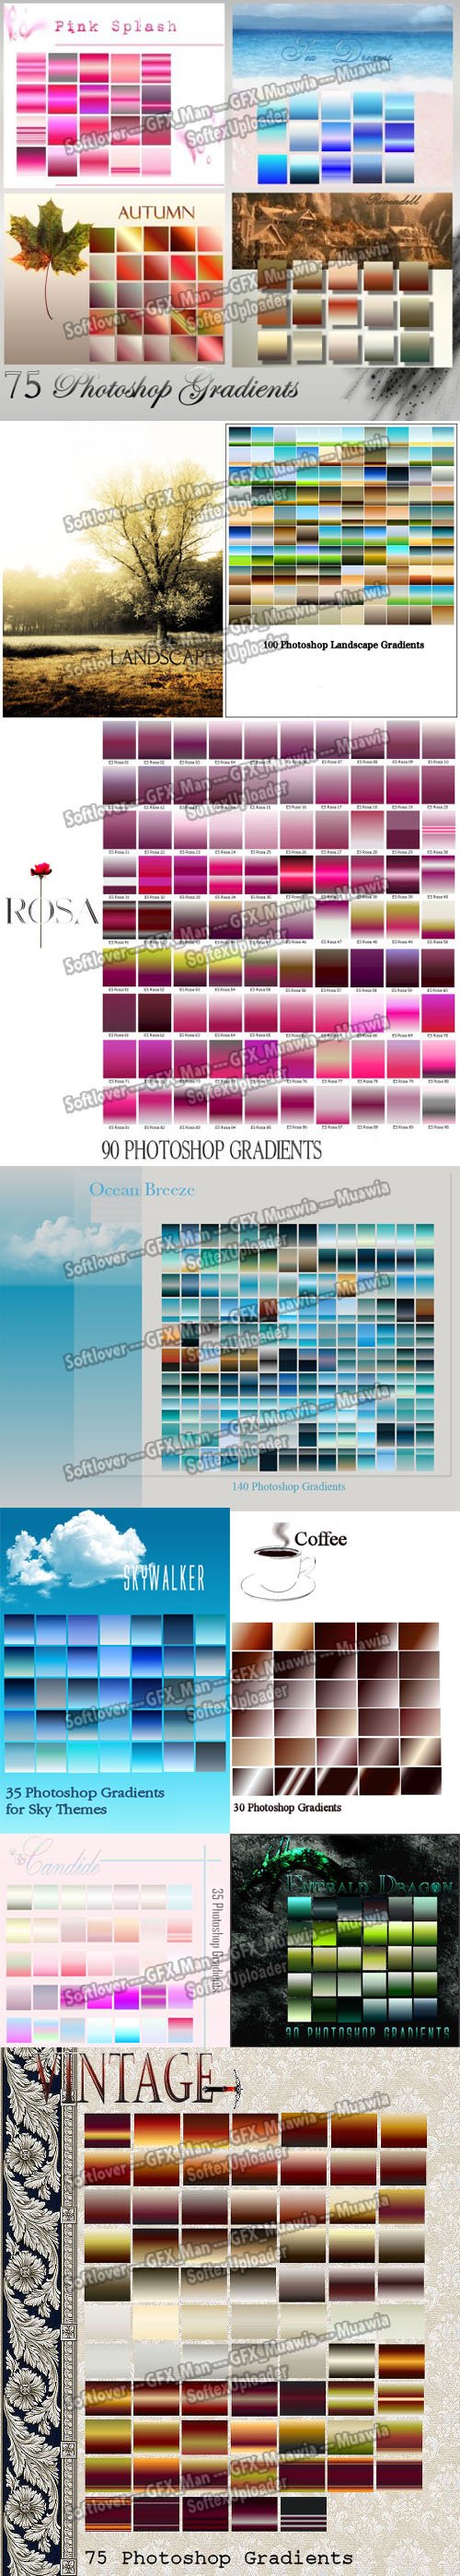 Amazing Collection of Gradients for Photoshop